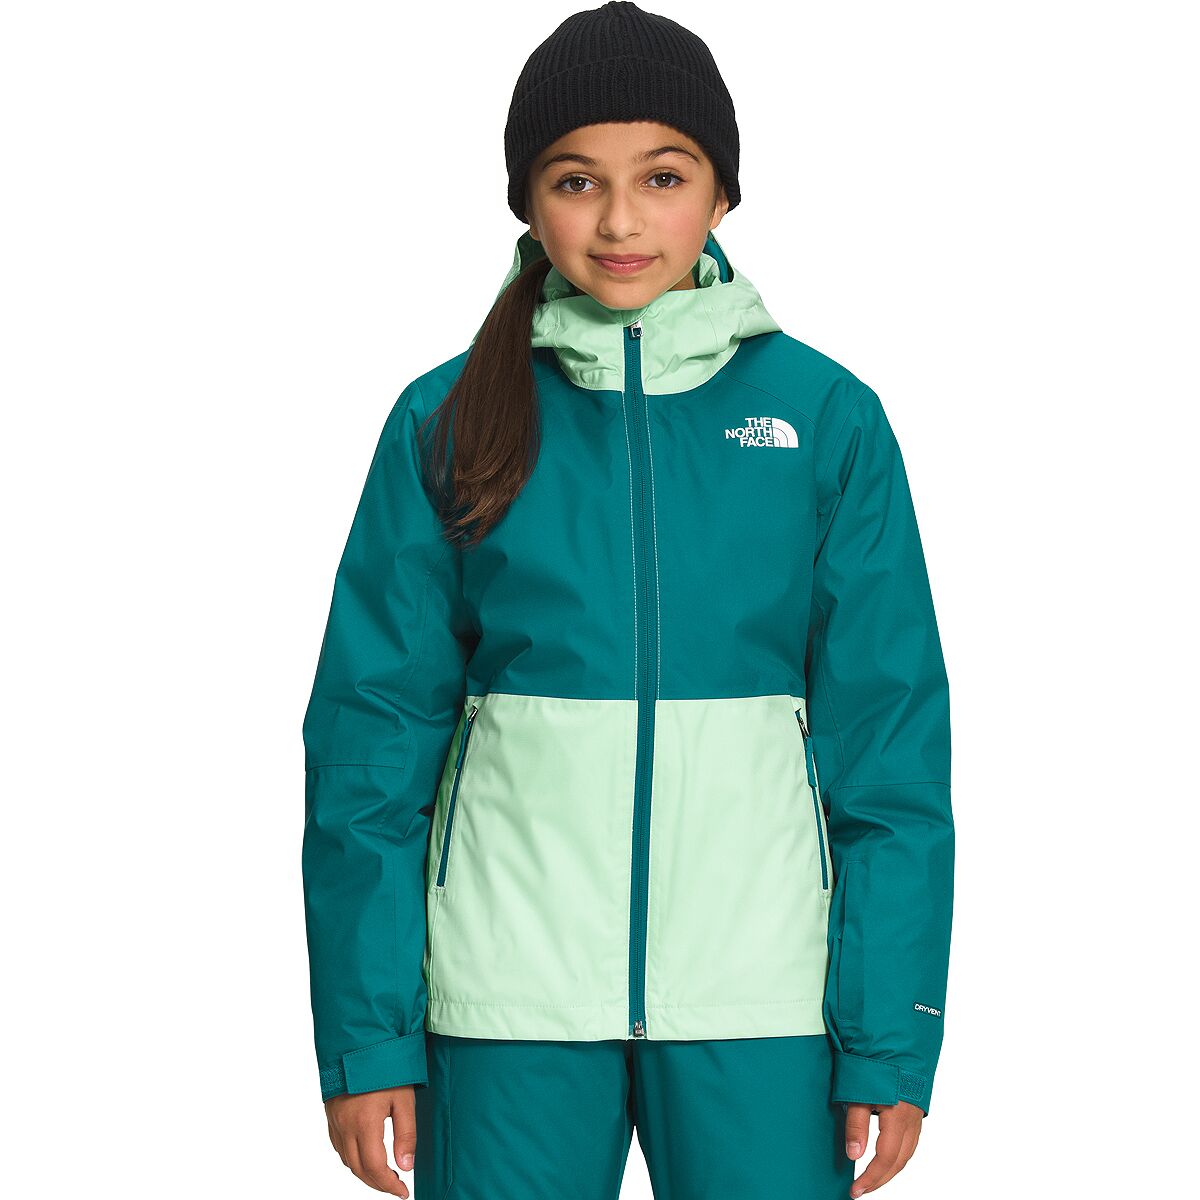 Powder Town Jacket - Women's by Patagonia | US-Parks.com